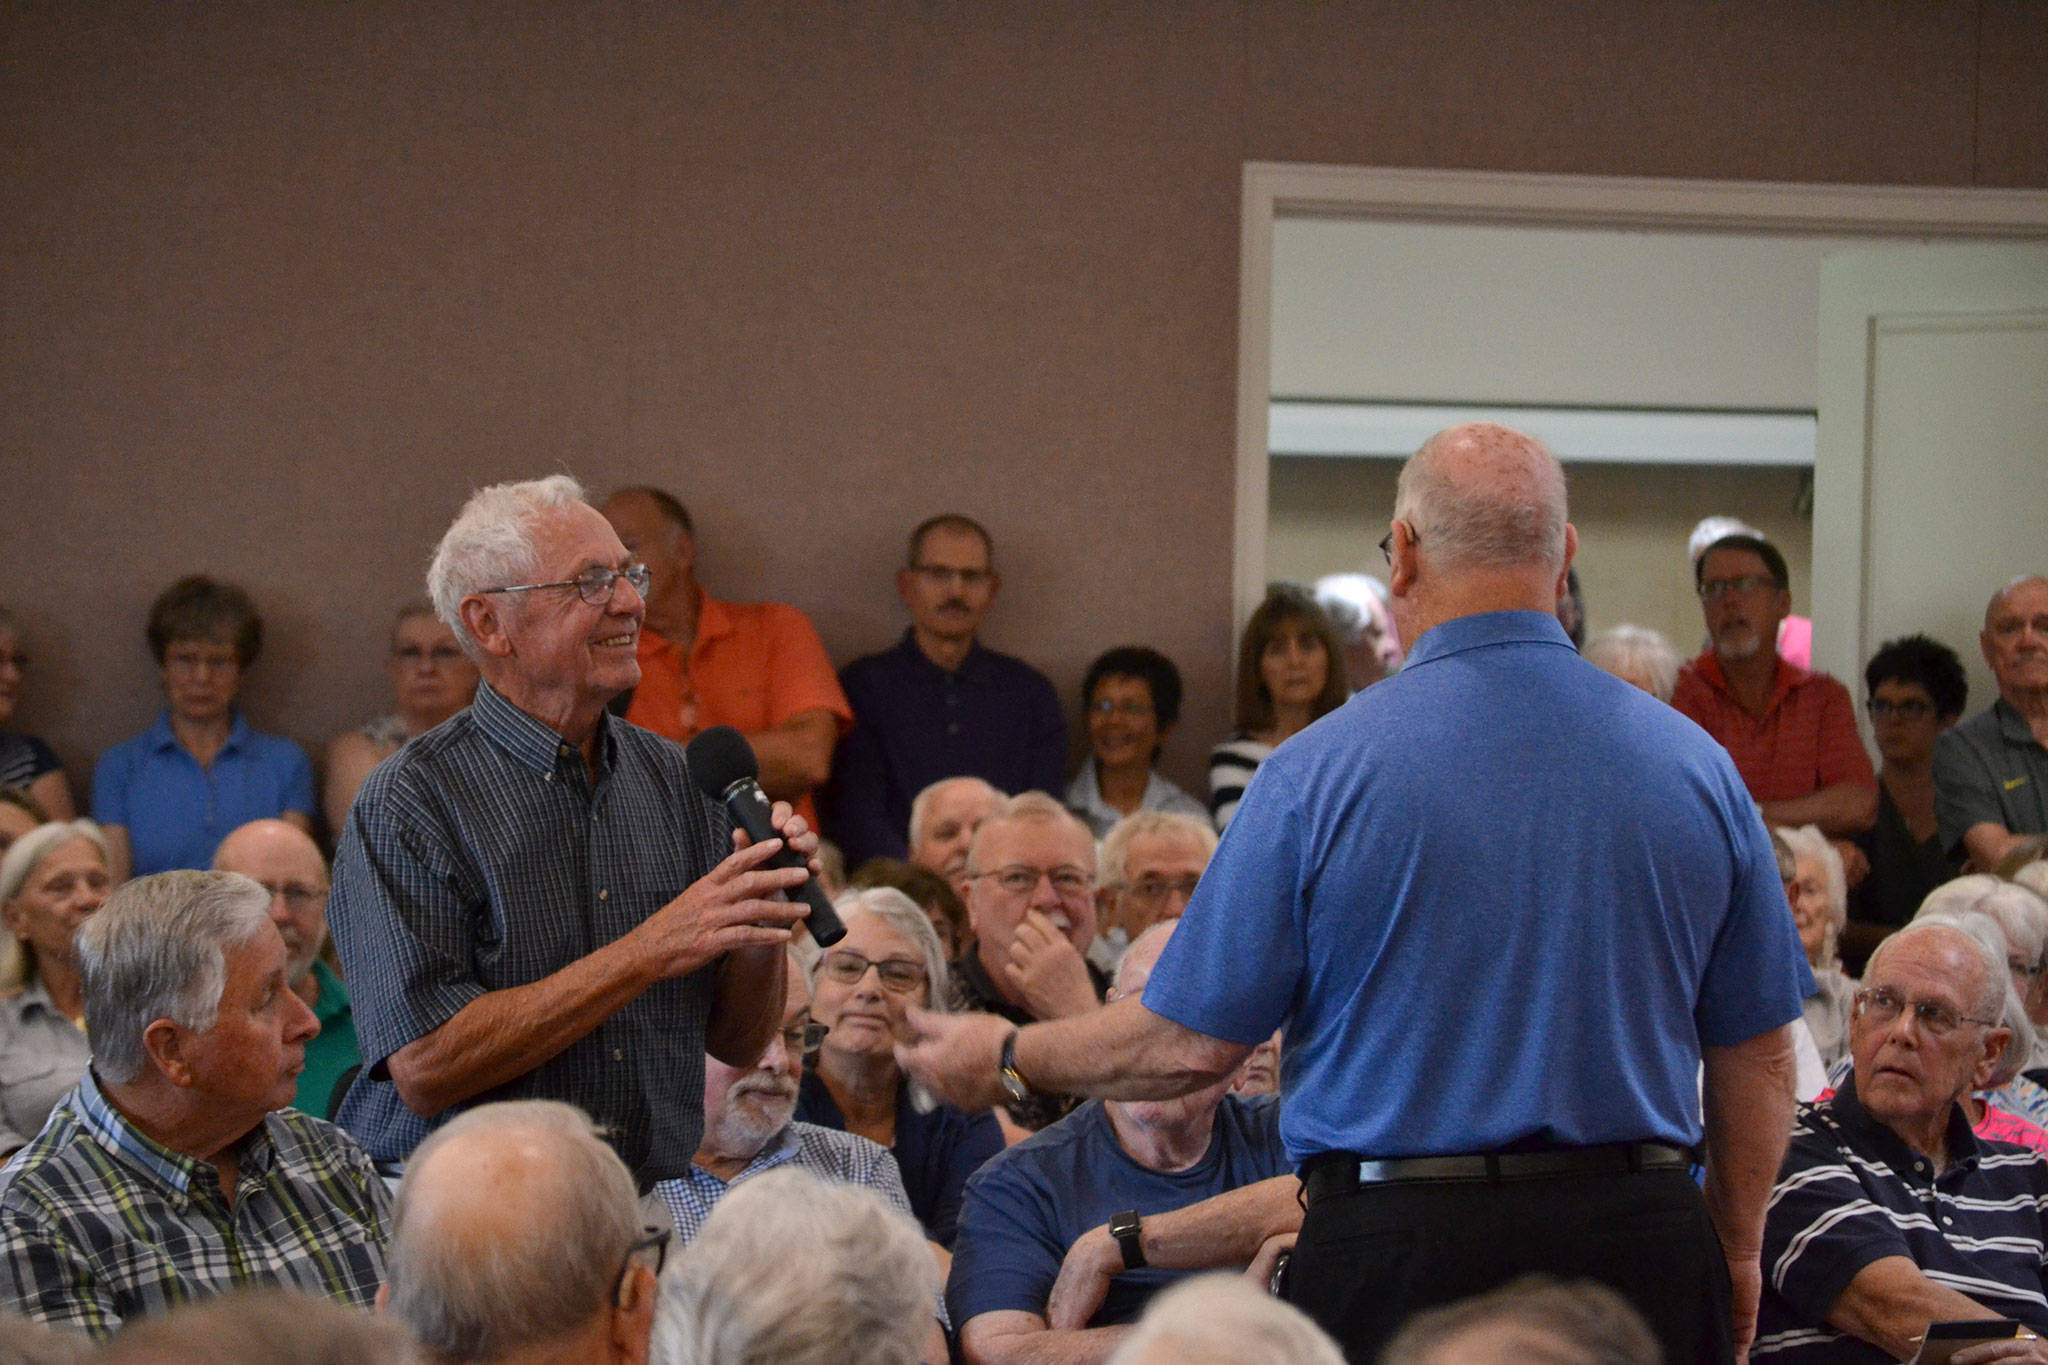 Bruce Mullikin, Sunland Golf & Country Club board president, takes the microphone from Fred Smith, SunLand Owners Association president, to share updates about the financial status of the club. “I’m an optimistic believer we can do this,” Mullikin said. Sequim Gazette photo by Matthew Nash